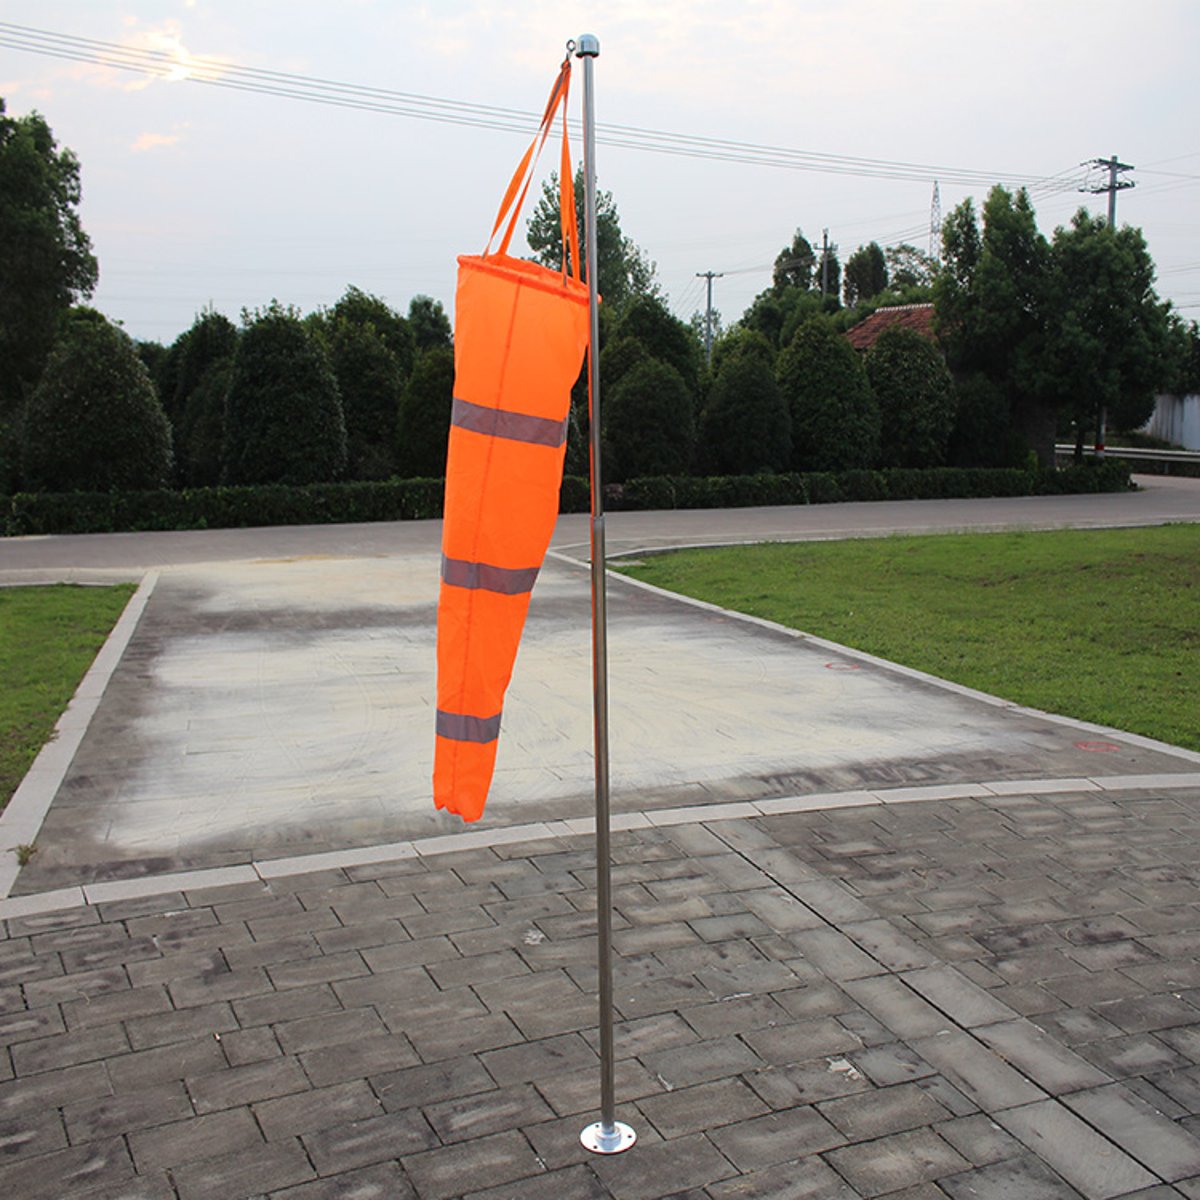 Reflective-Tape-Outdoor-Windsocks-Bag-Weather-Station-Flag-Belt-for-Airport-Garden-Patio-Lawn-Safety-1573310-8